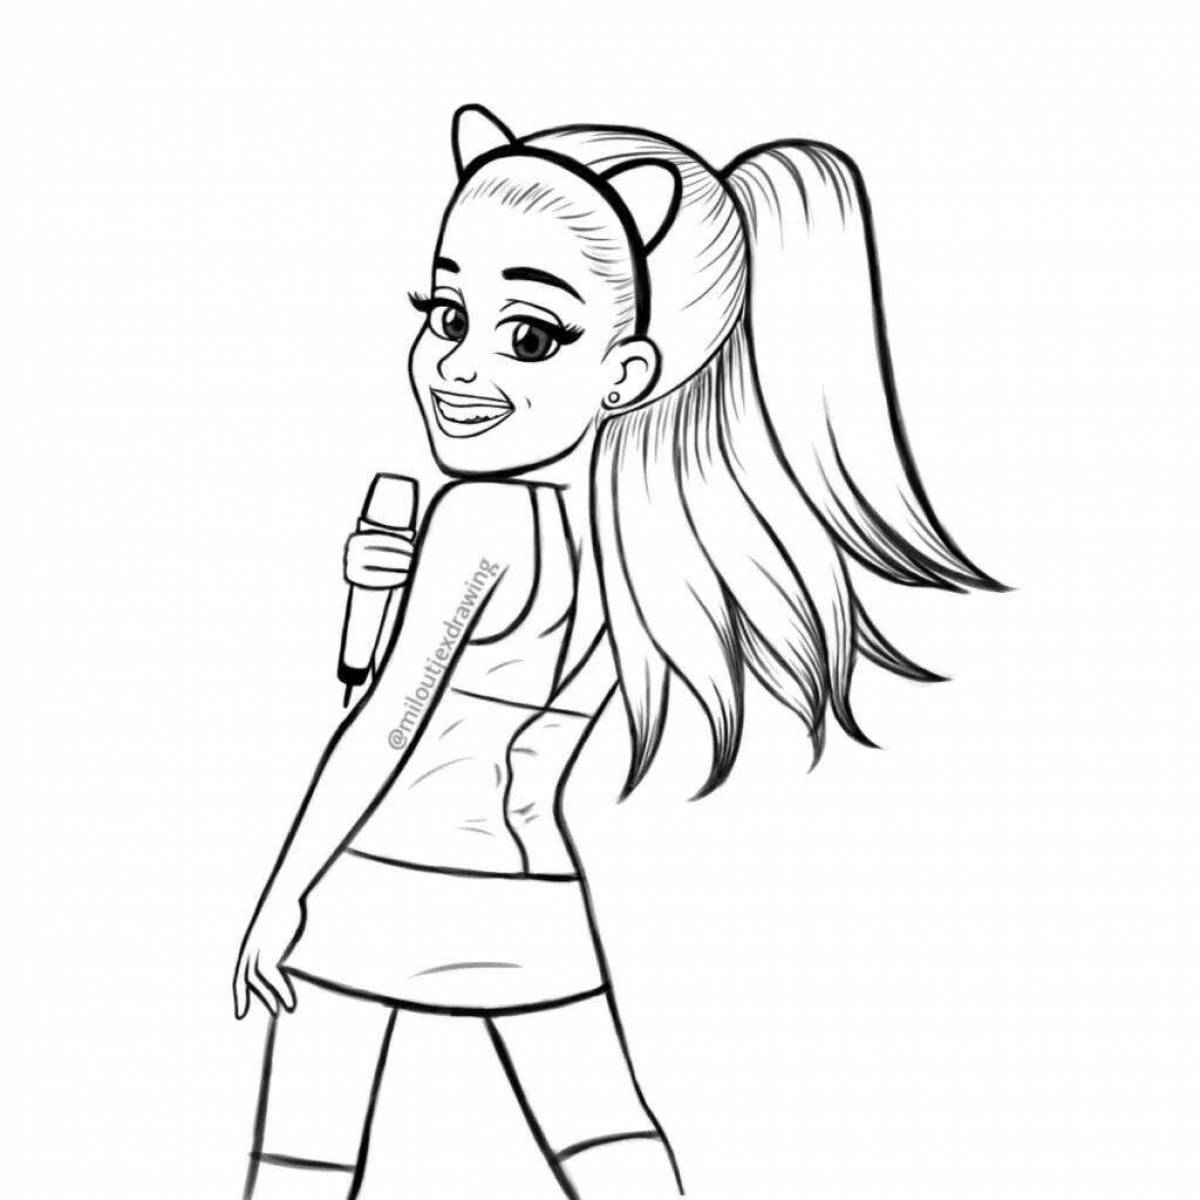 Ariana grande's awesome coloring page